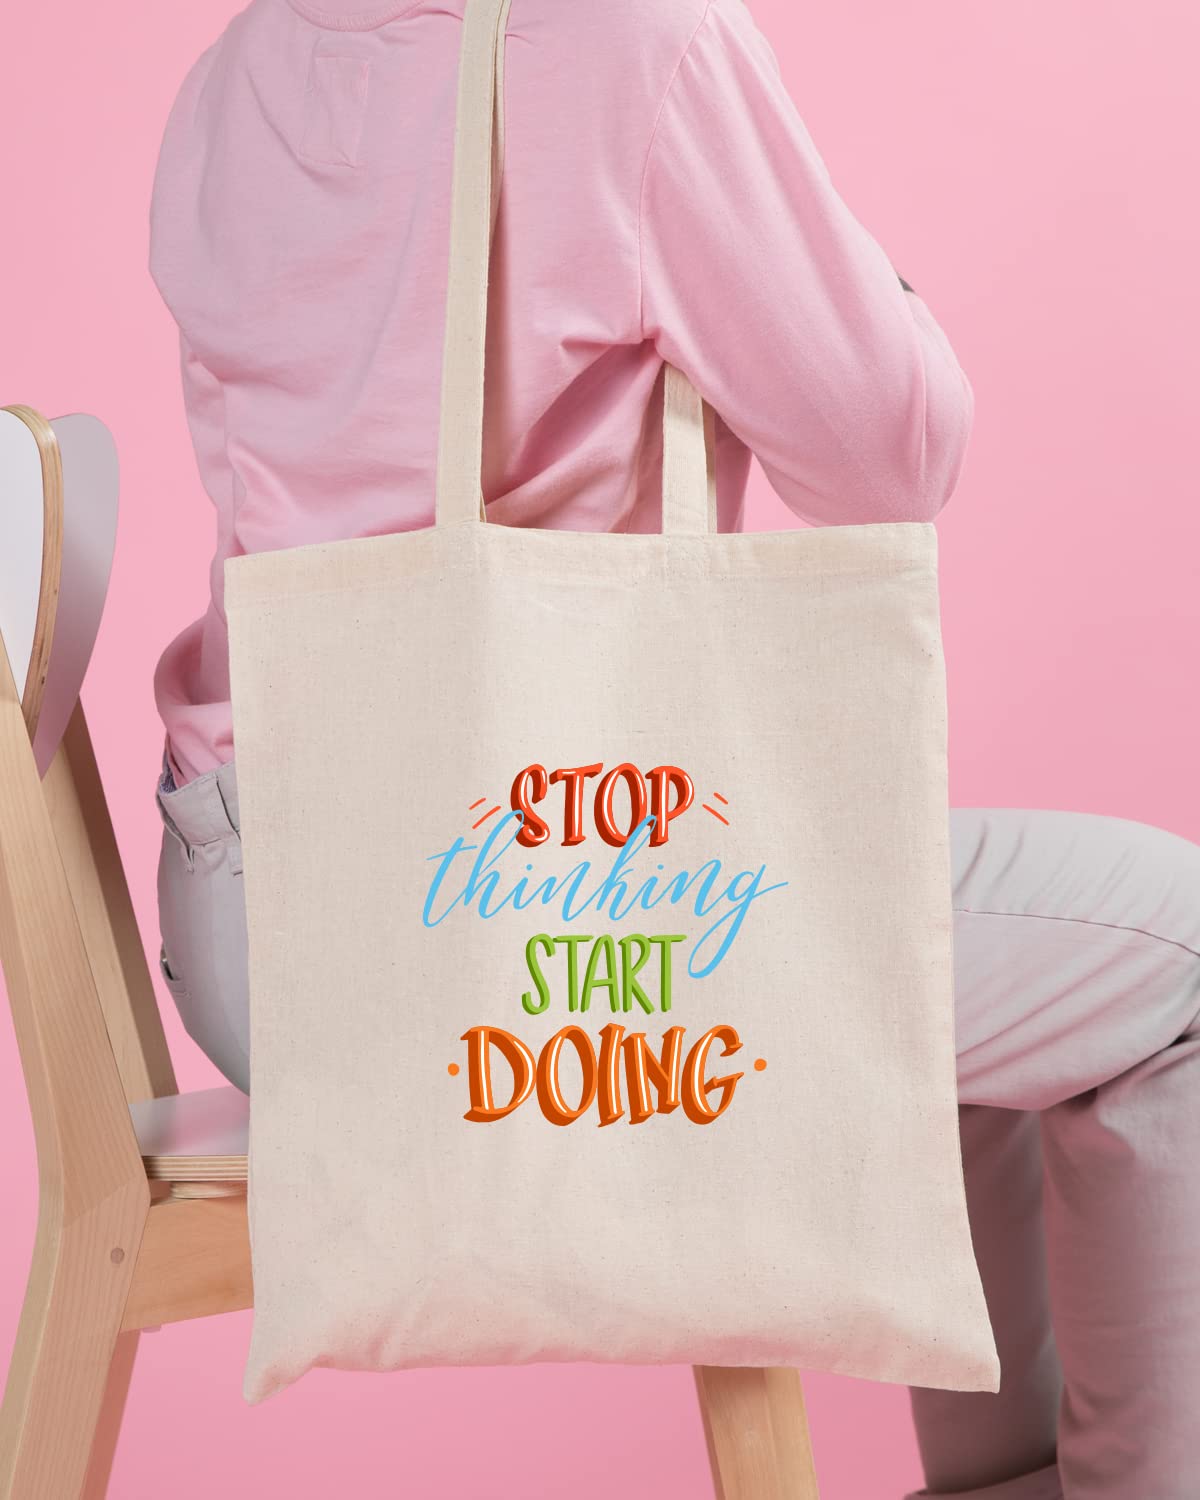 The Pink Magnet Stop Thinking Start Doing Tote Bag - Canvas Tote Bag for Women | Printed Multipurpose Cotton Bags | Cute Hand Bag for Girls | Best for College, Travel, Grocery | Reusable Shopping Bag | Eco-Friendly Tote Bag